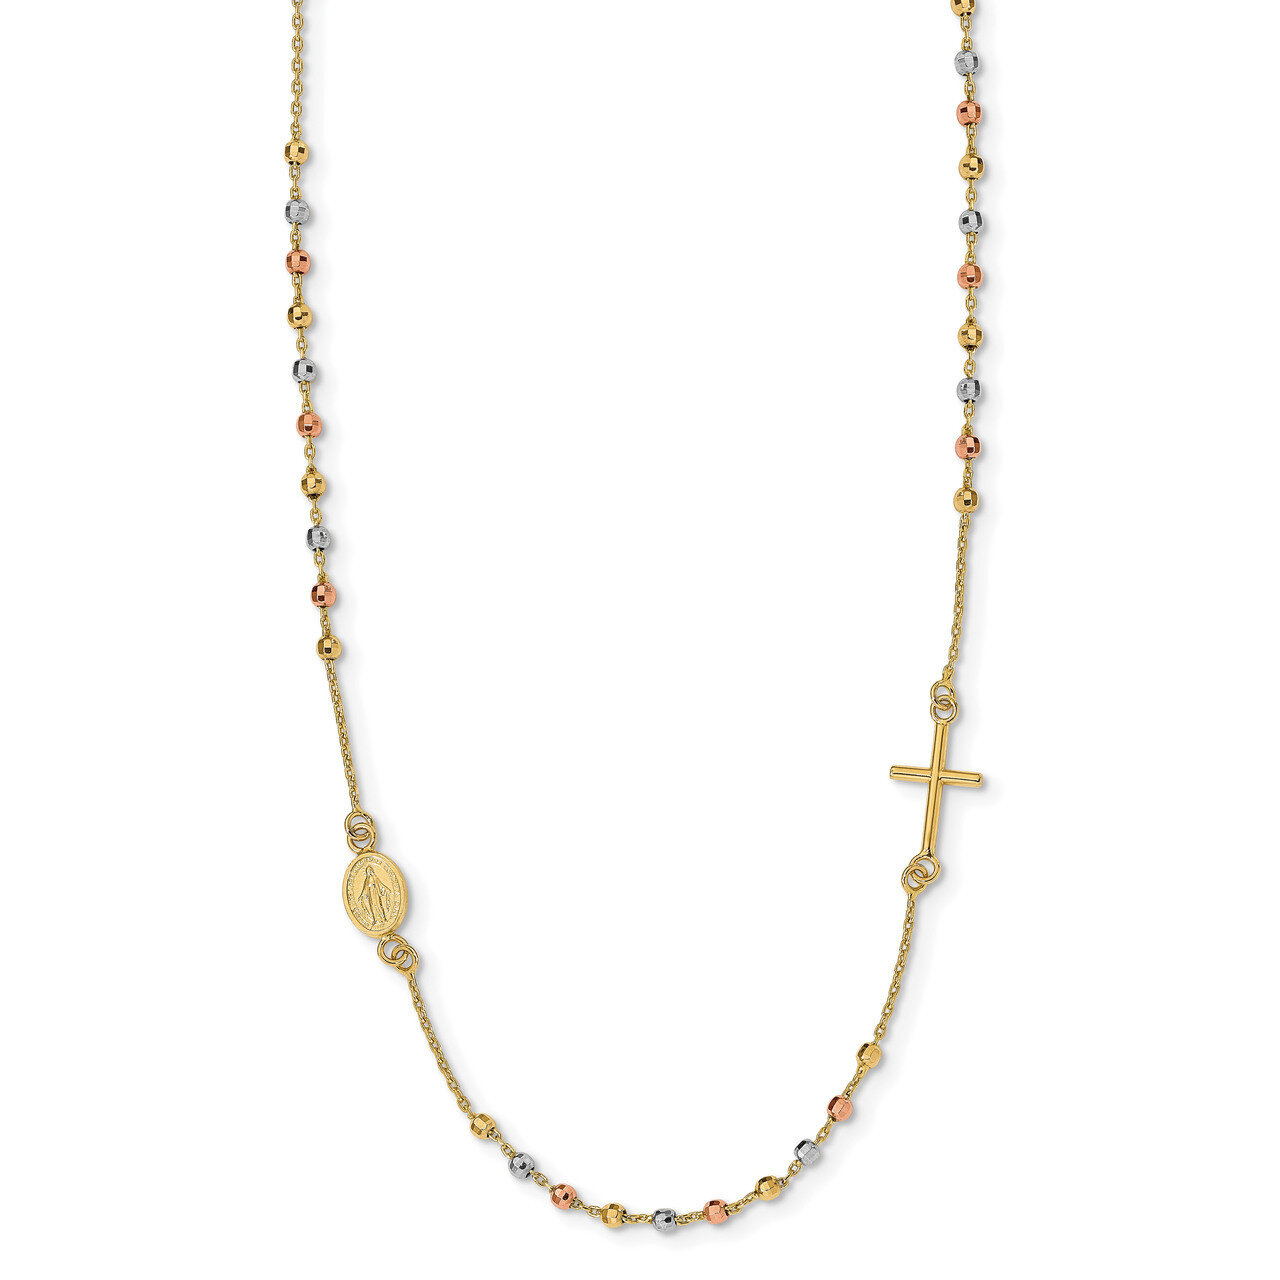 Sideways Cross Beaded Rosary Style Necklace 18 Inch 14k Tri-color Gold HB-LF1140-18